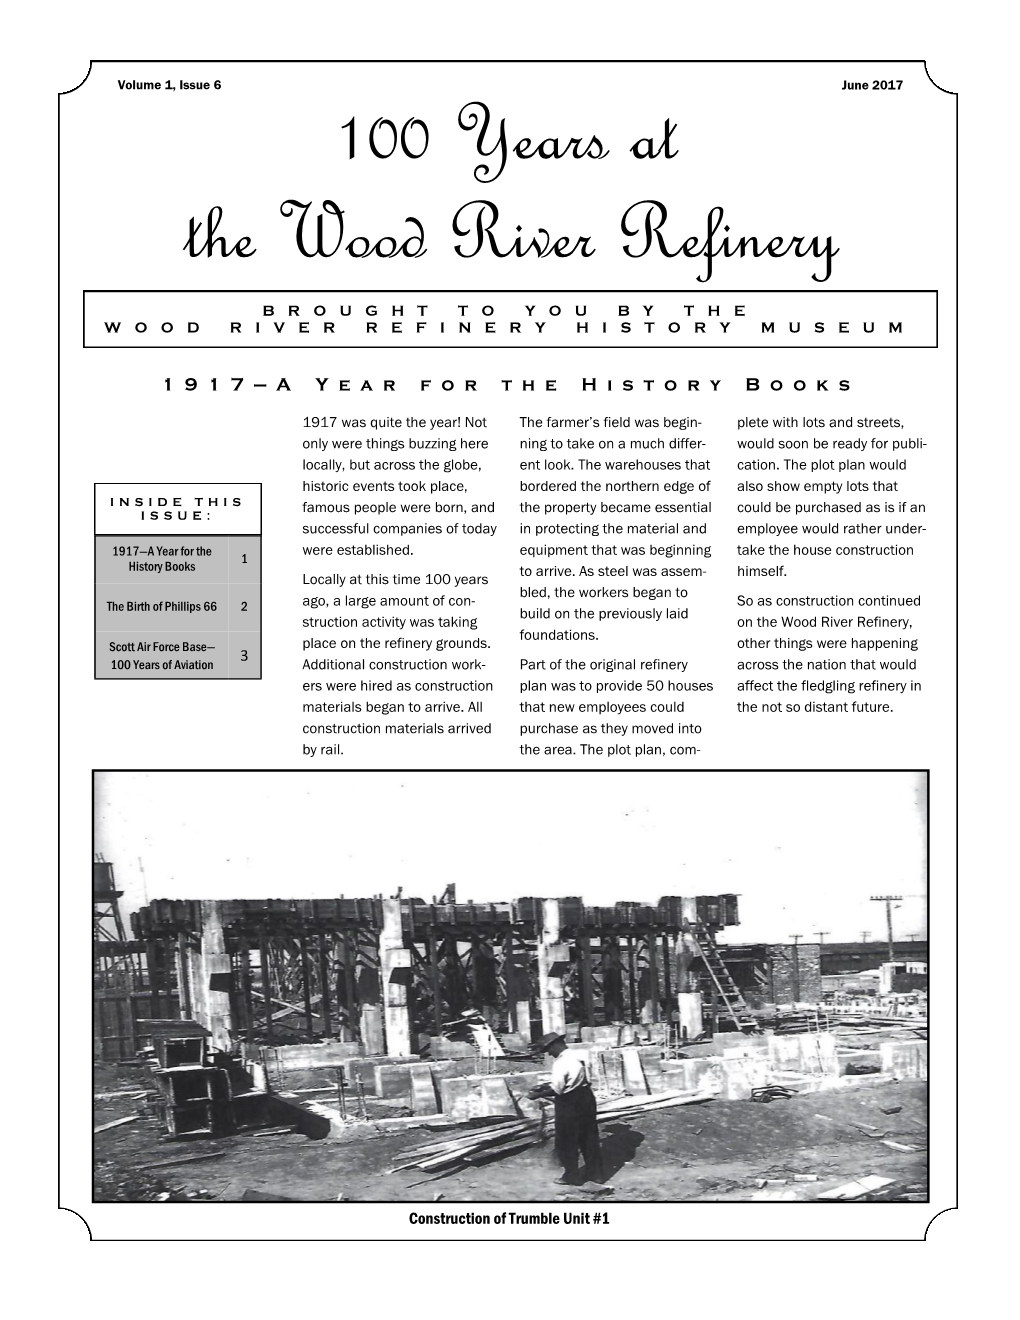 100 Years at the Wood River Refinery